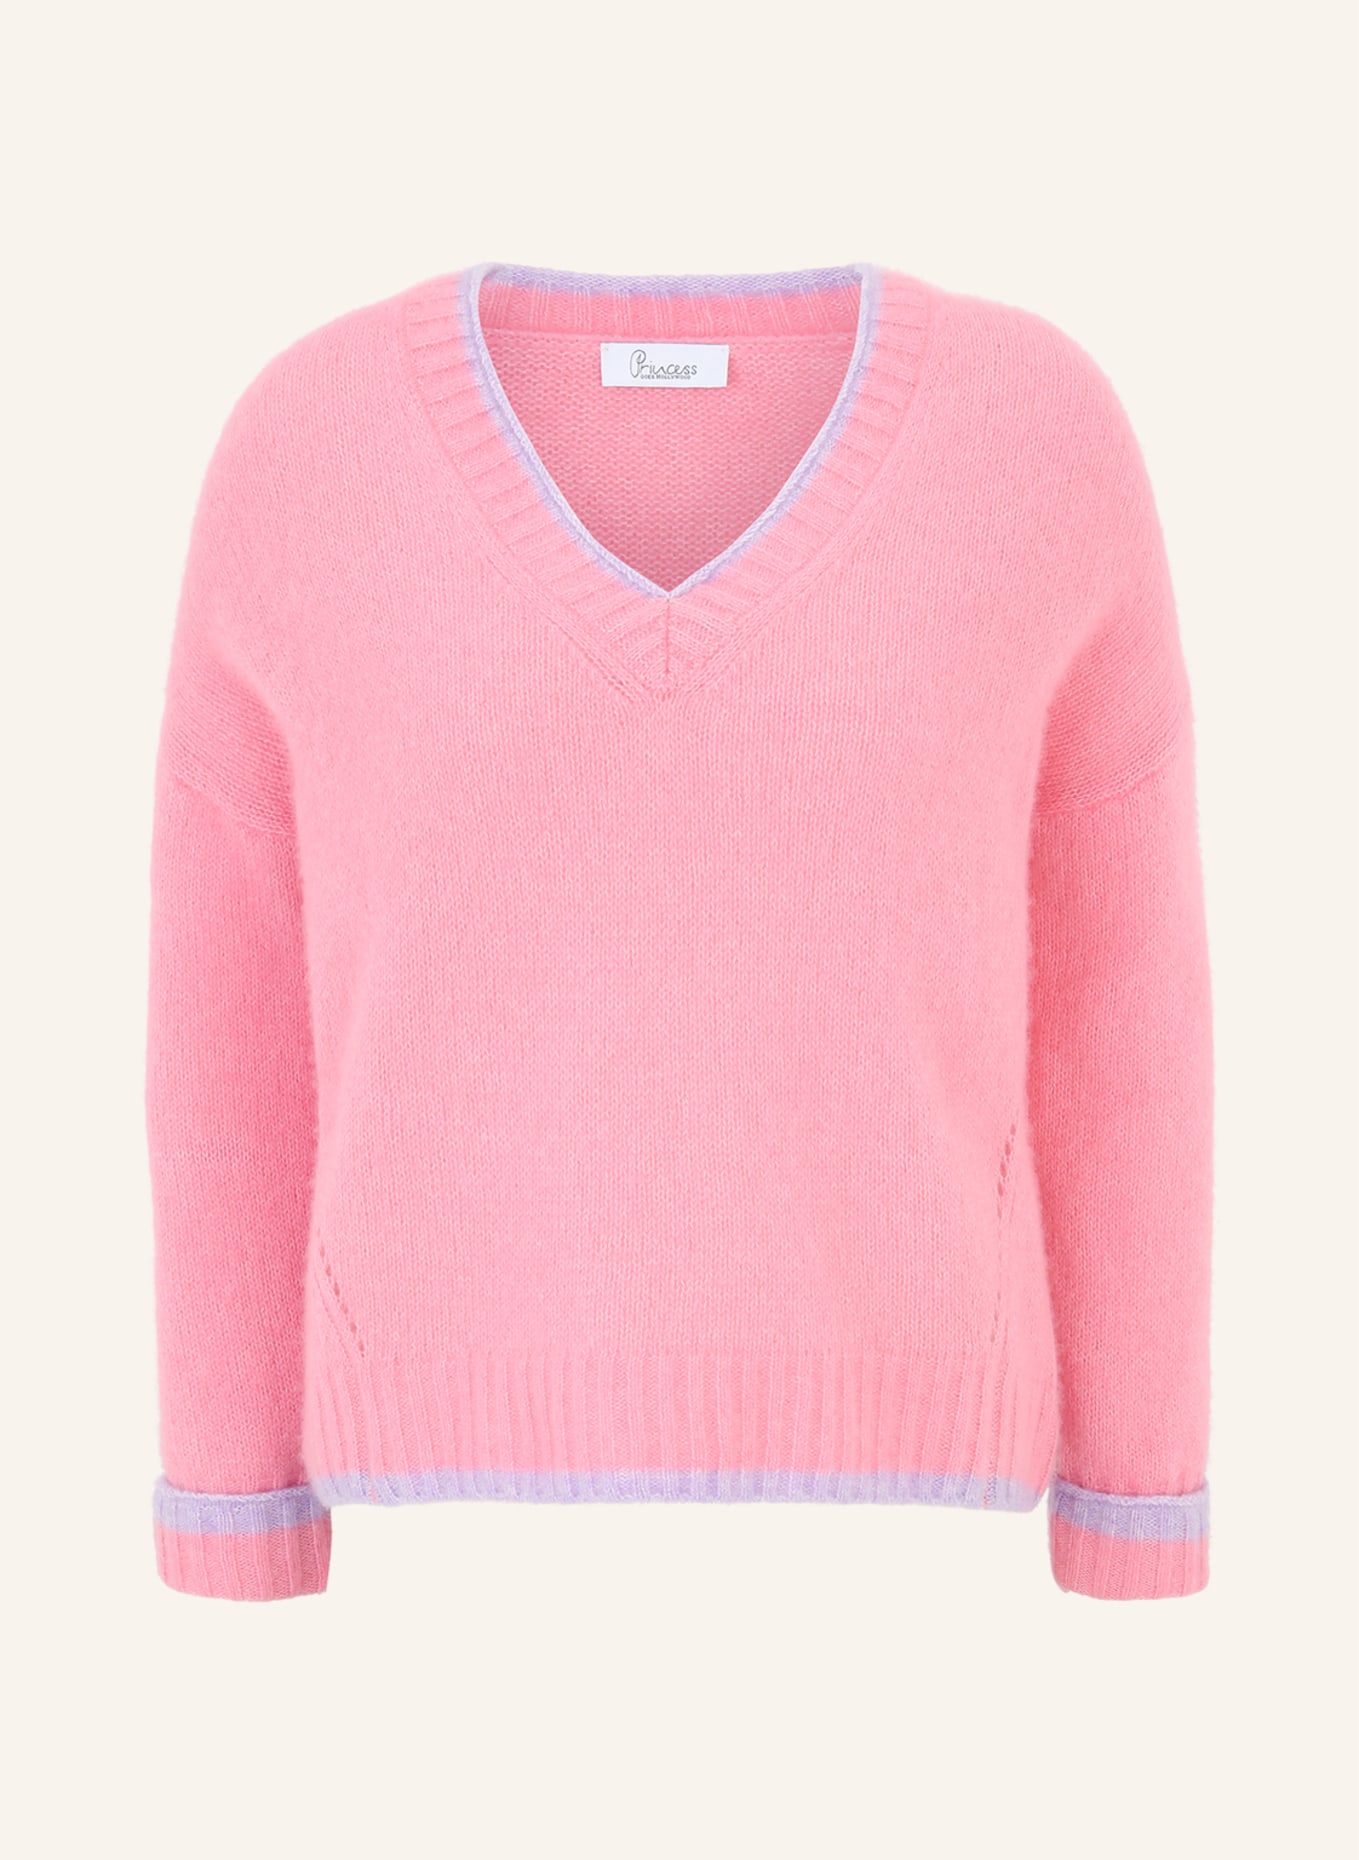 Princess GOES HOLLYWOOD Pullover mit Cashmere, Farbe: PINK (Bild 1)